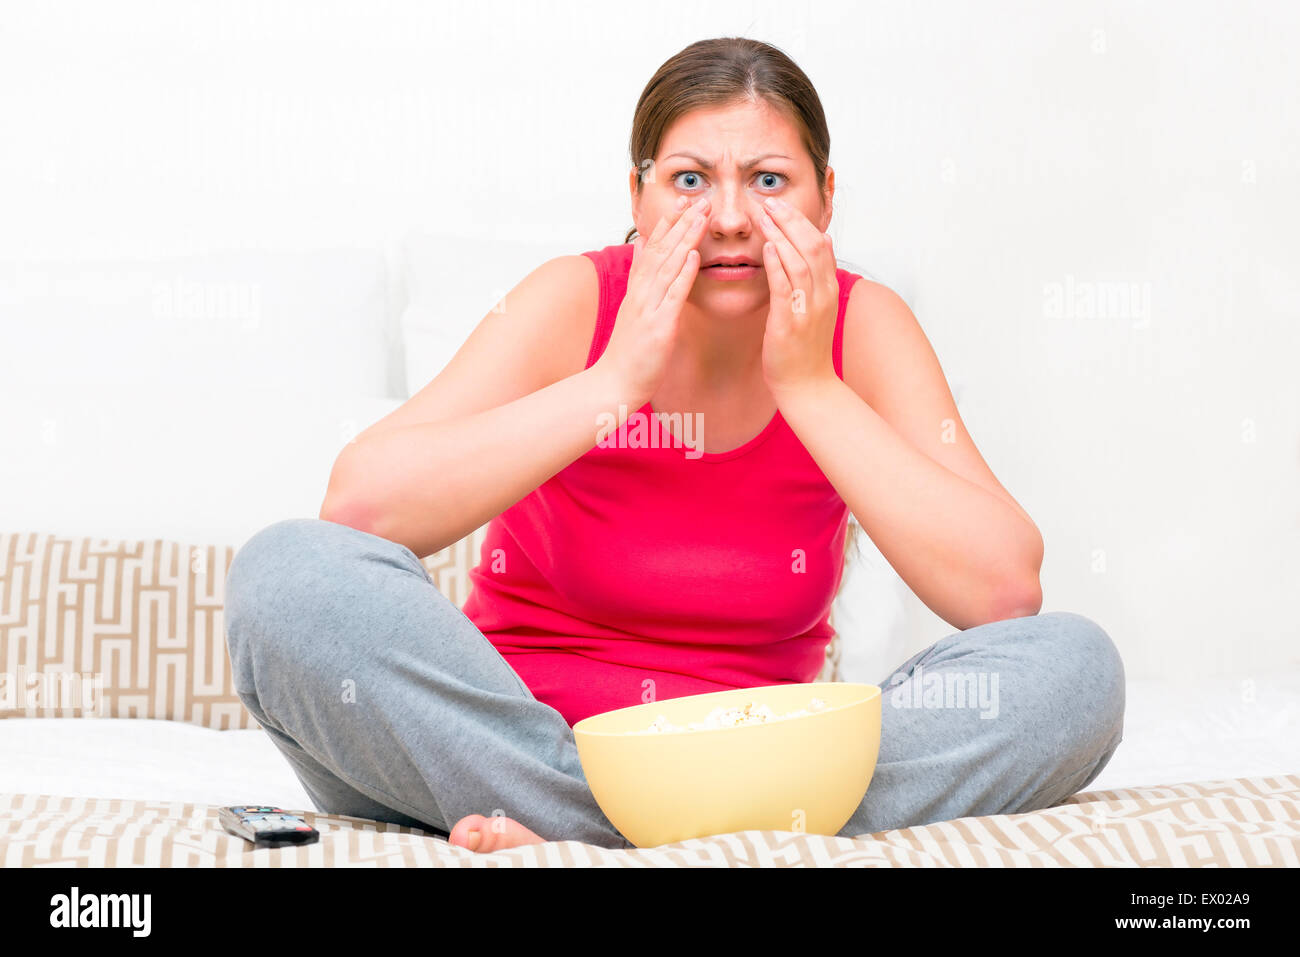 emotional woman watching a horror movie on TV Stock Photo